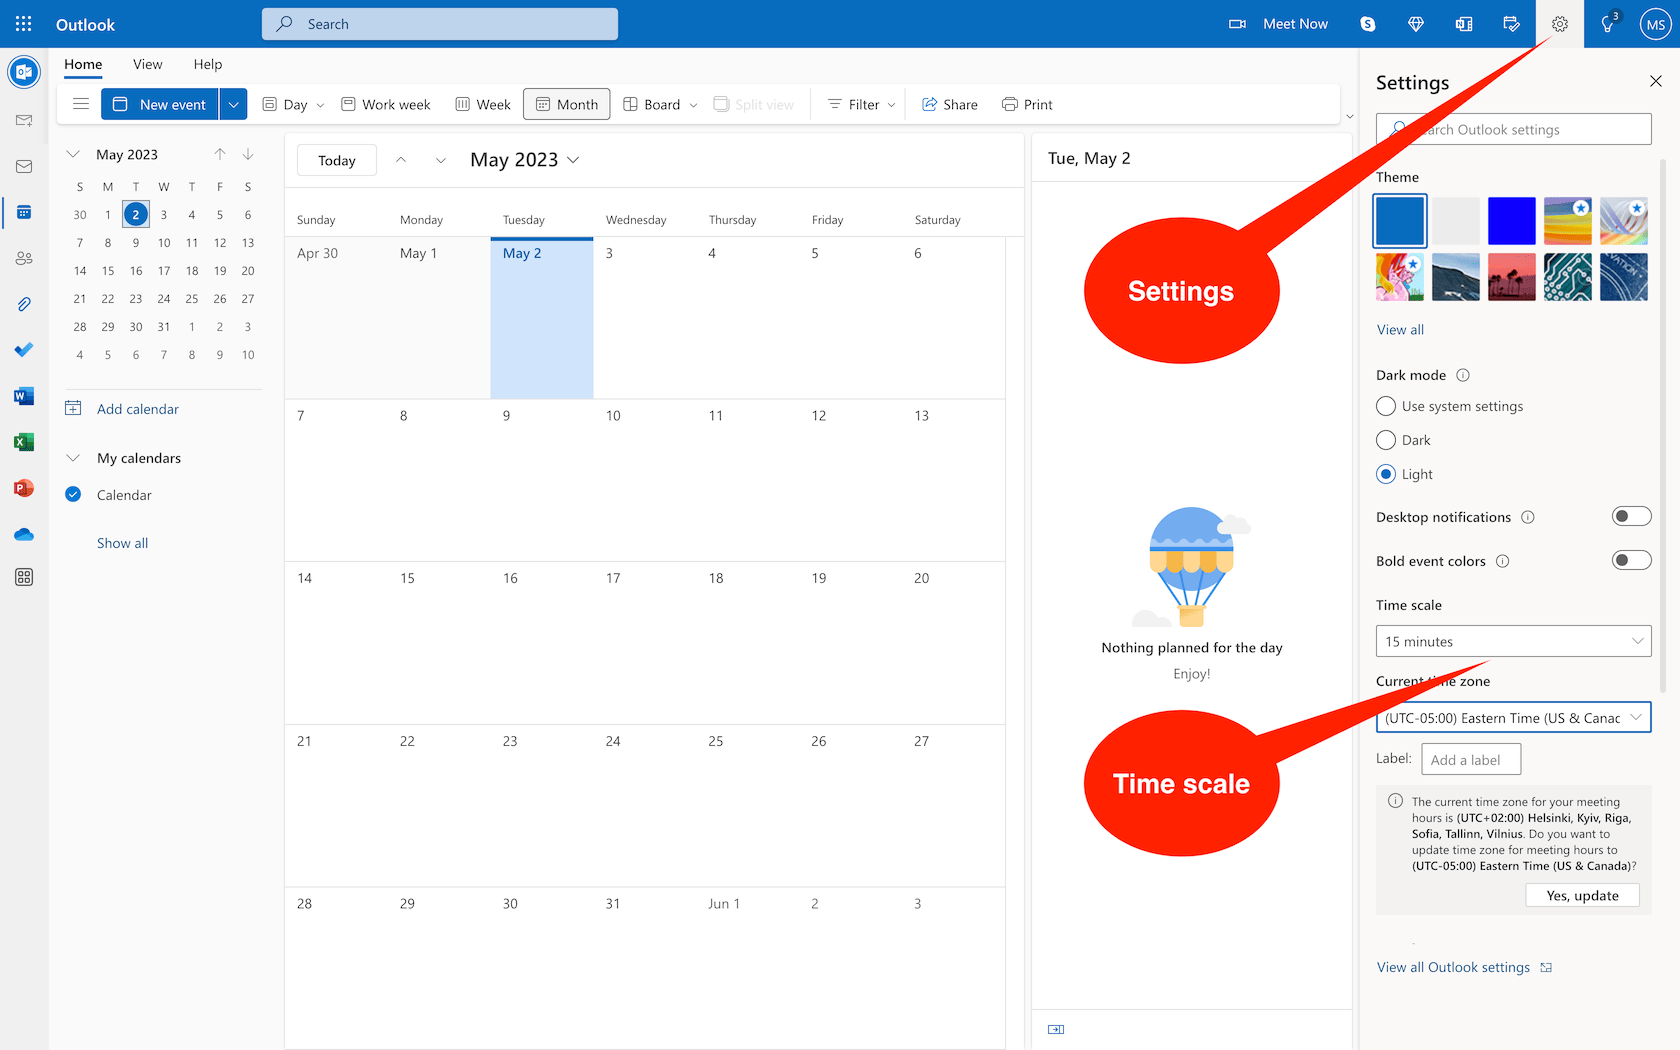 Change the Time scale in the Calendar settings